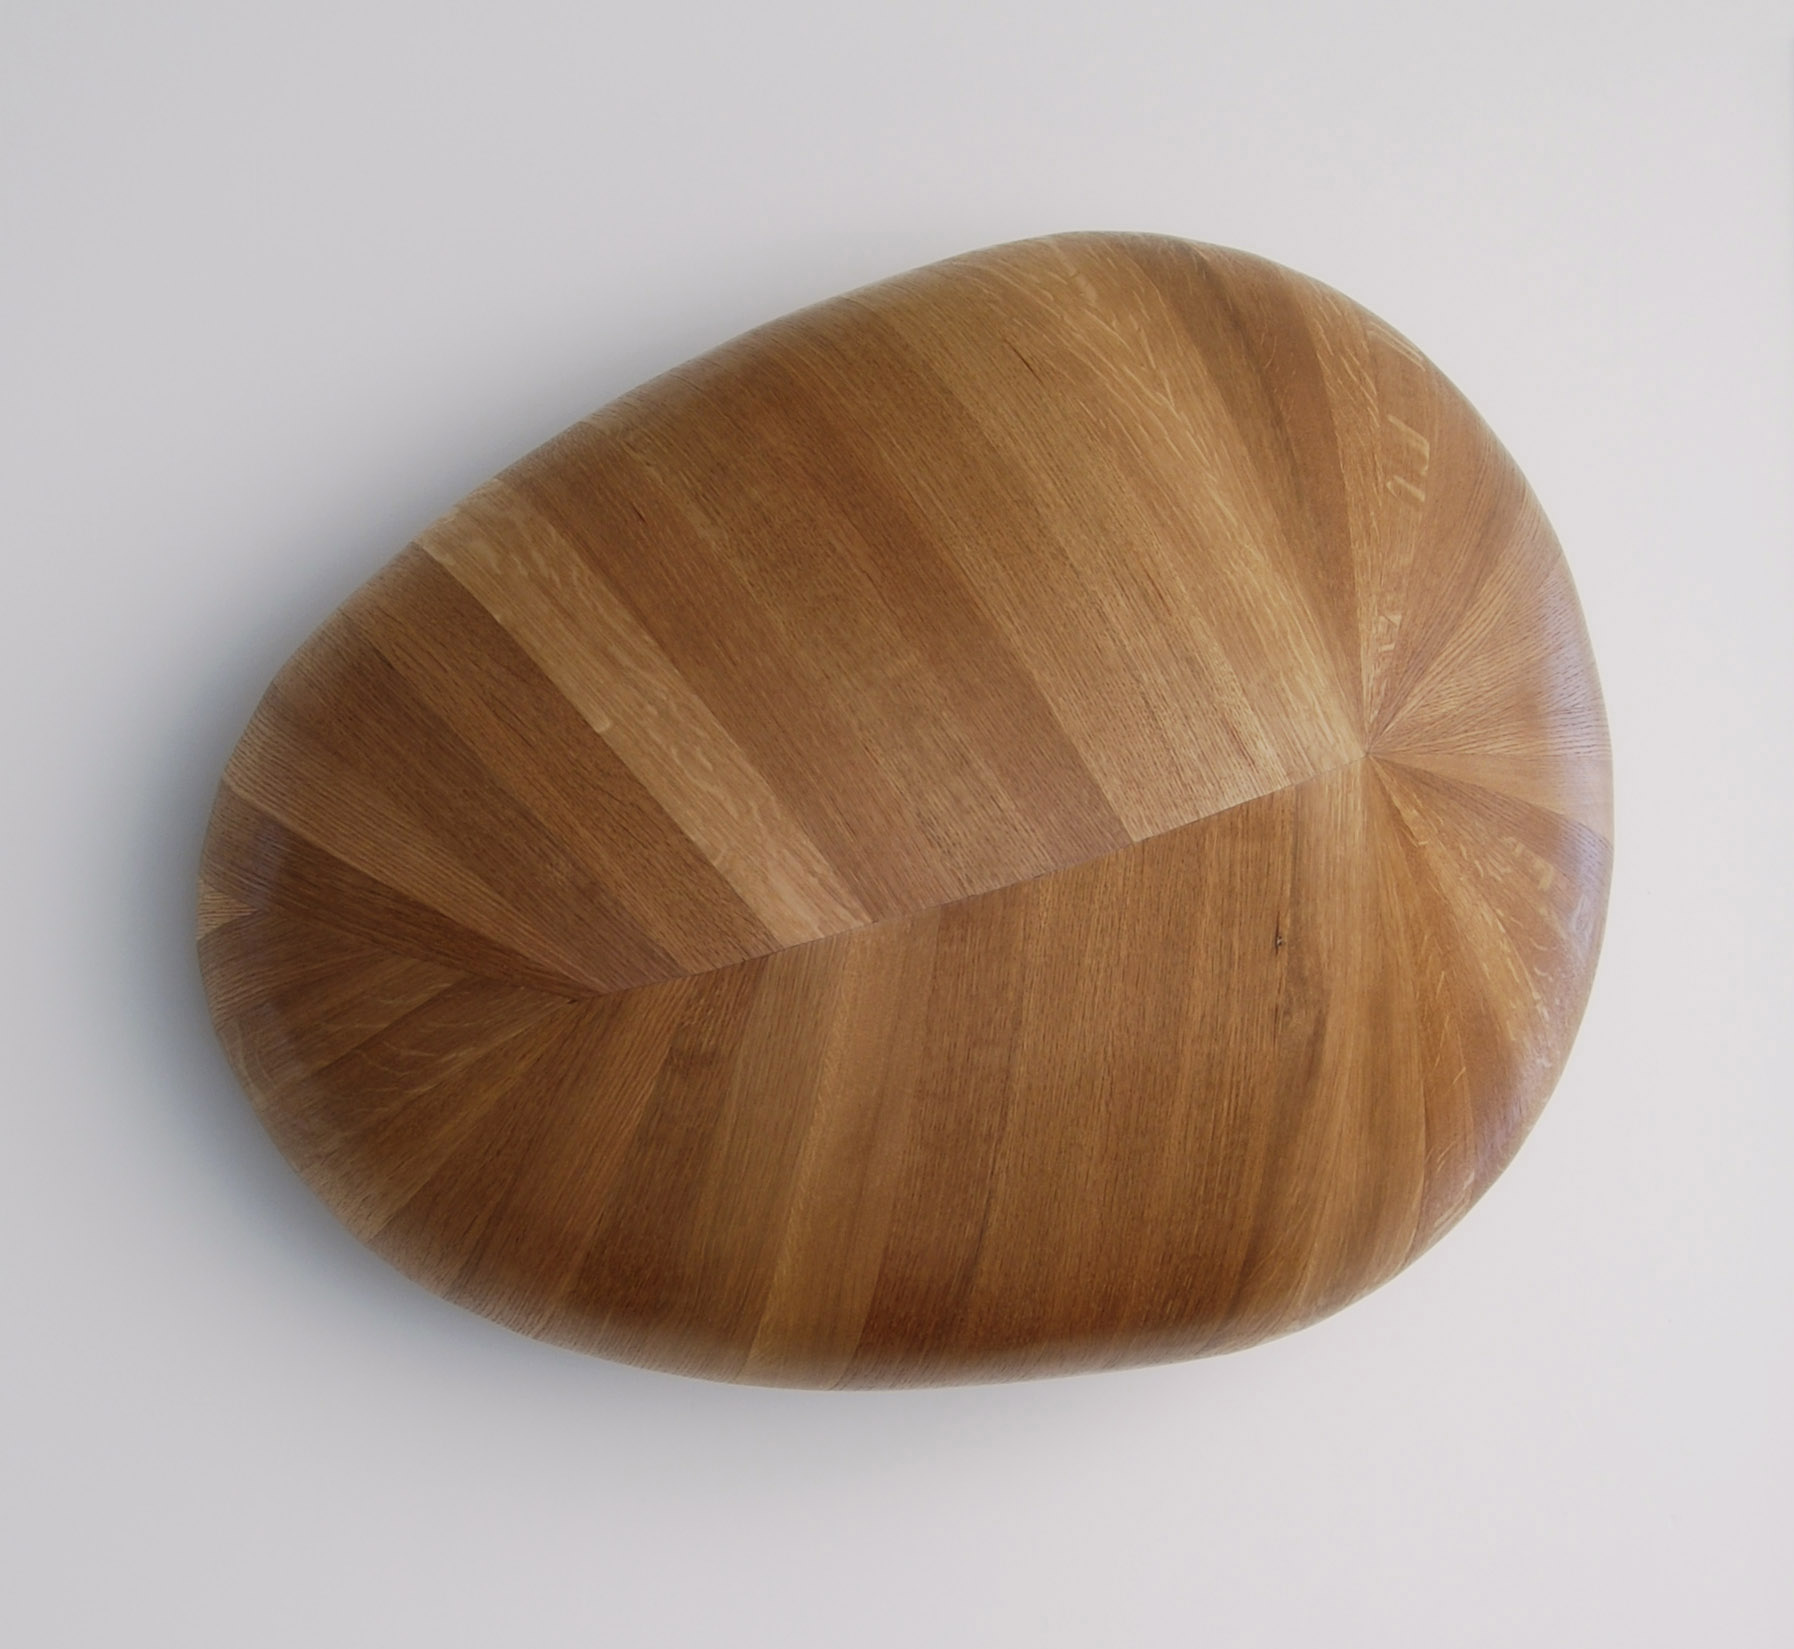  Float, 2016  31 x 41 x 16 inches  wood 